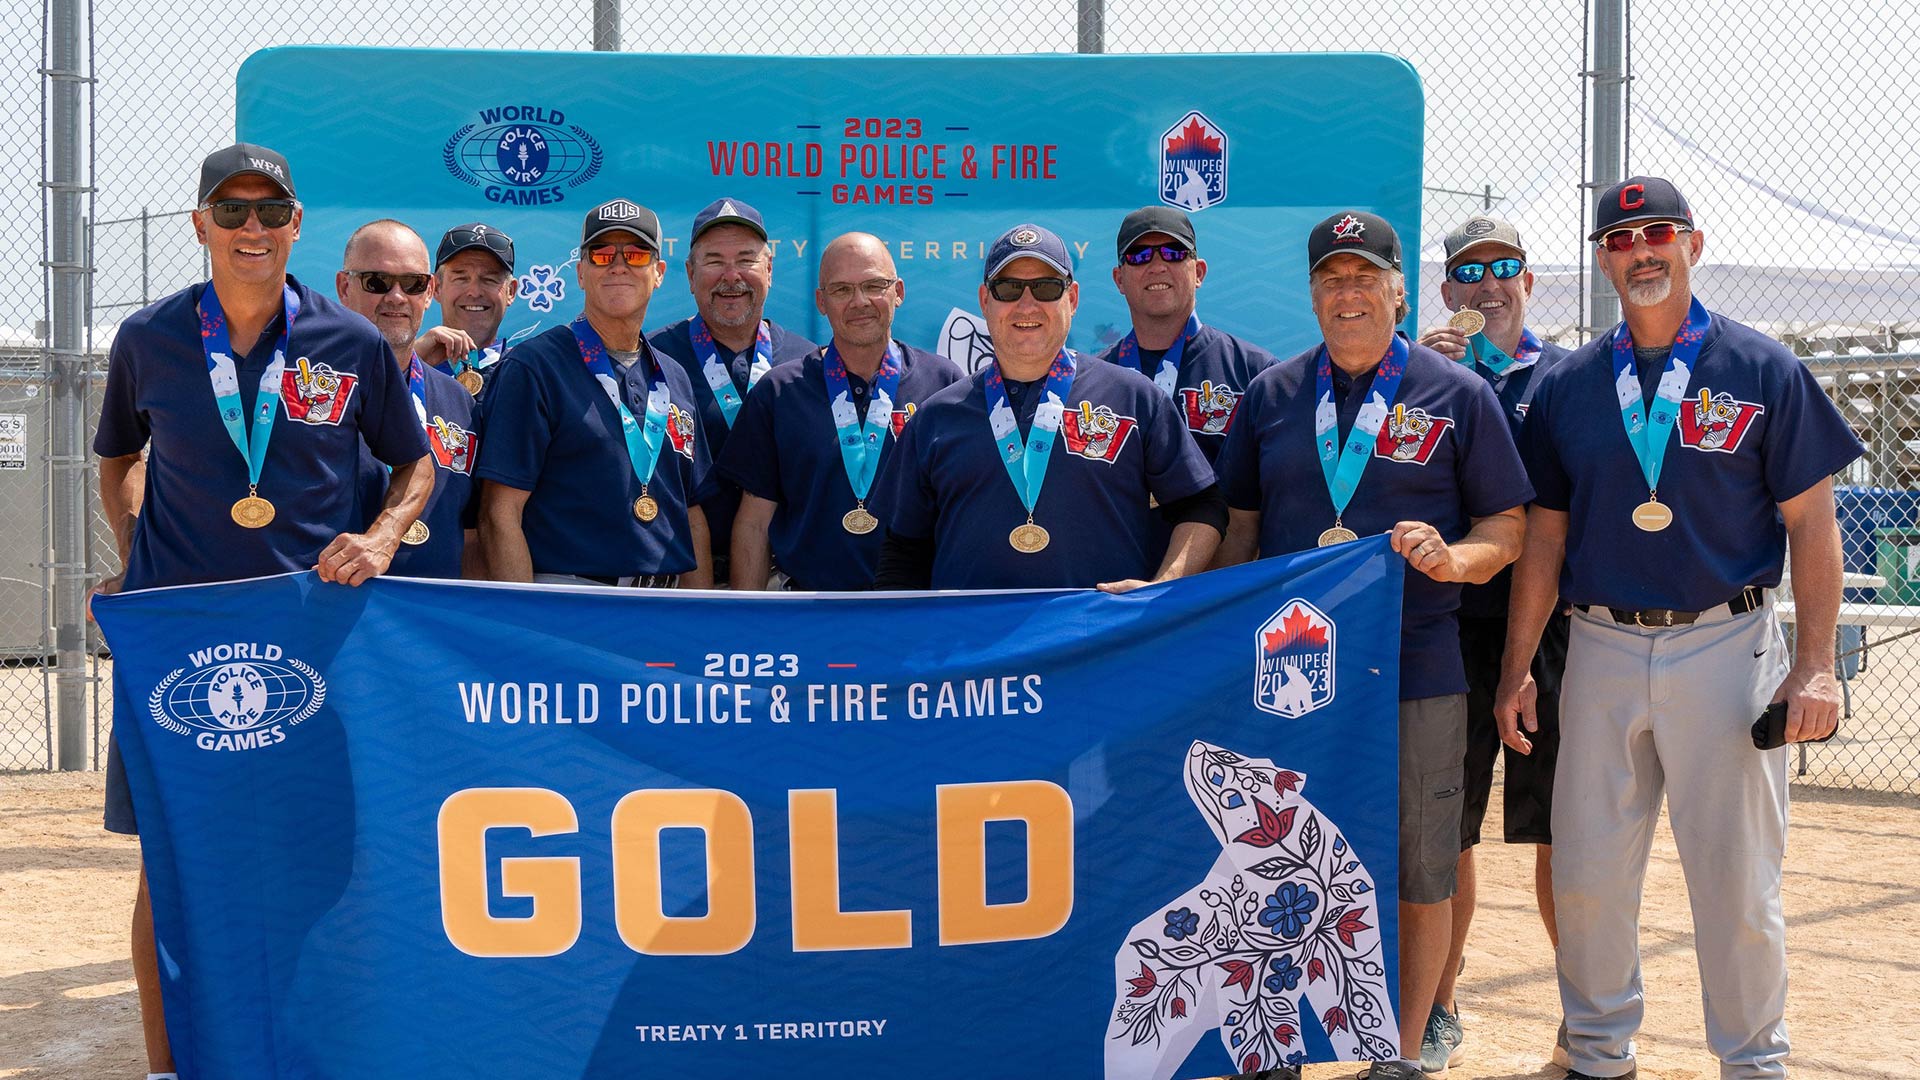 World Police & Fire Games Adding Firefighter Challenge as an Official Sport of the Games